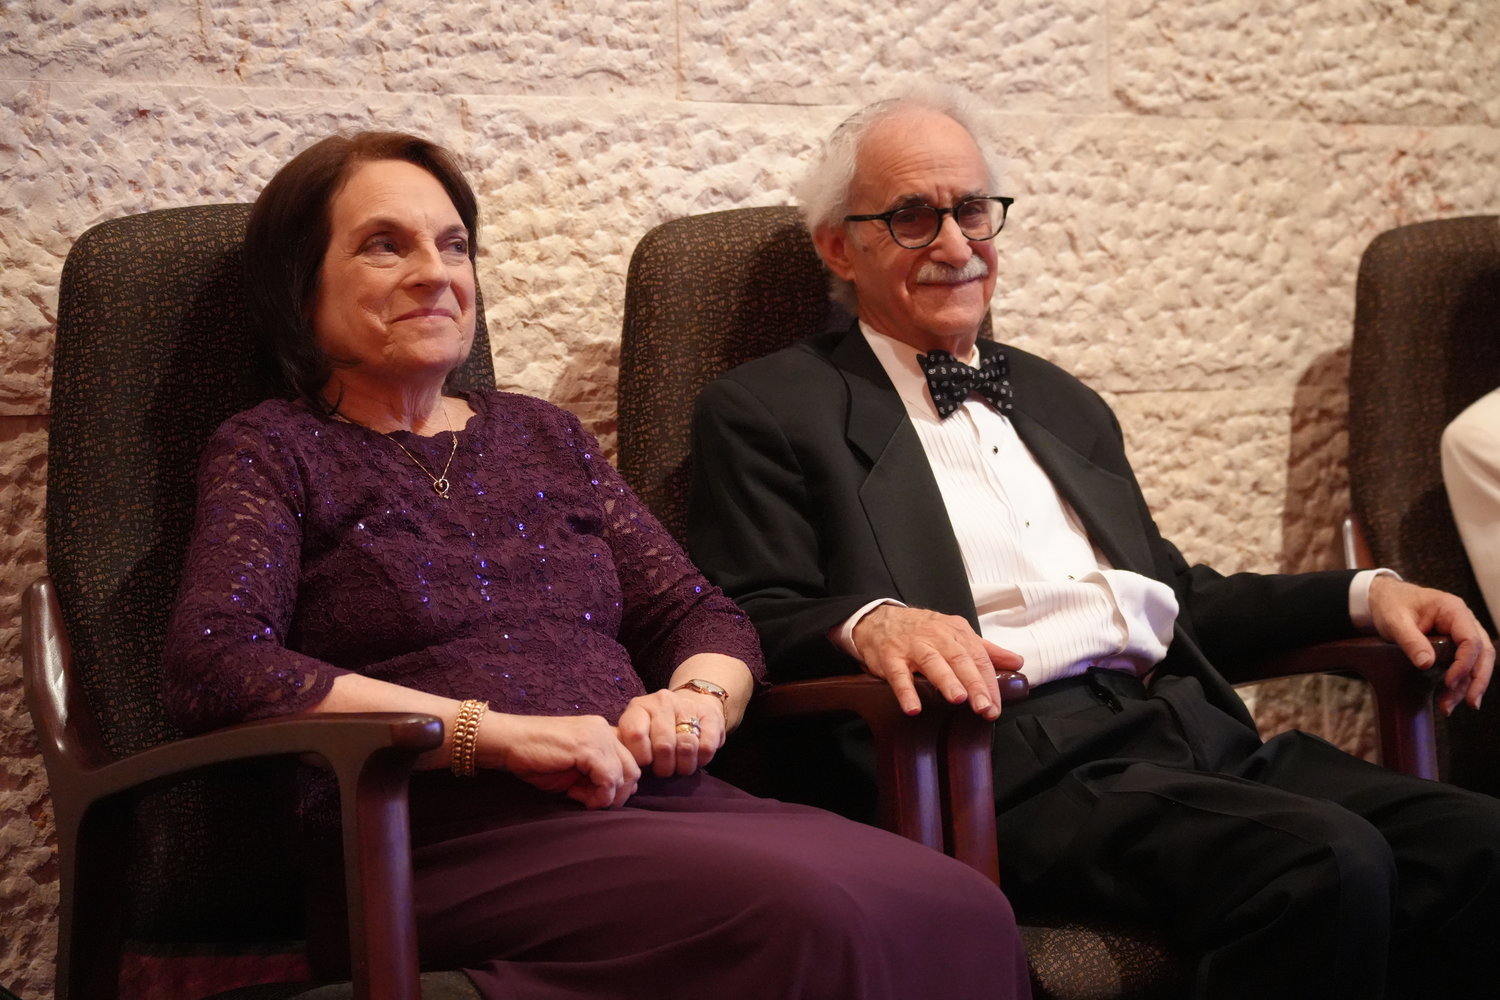 Rabbi Androphy, right, sat with his wife, Nancy, during the speech portion of his retirement gala.